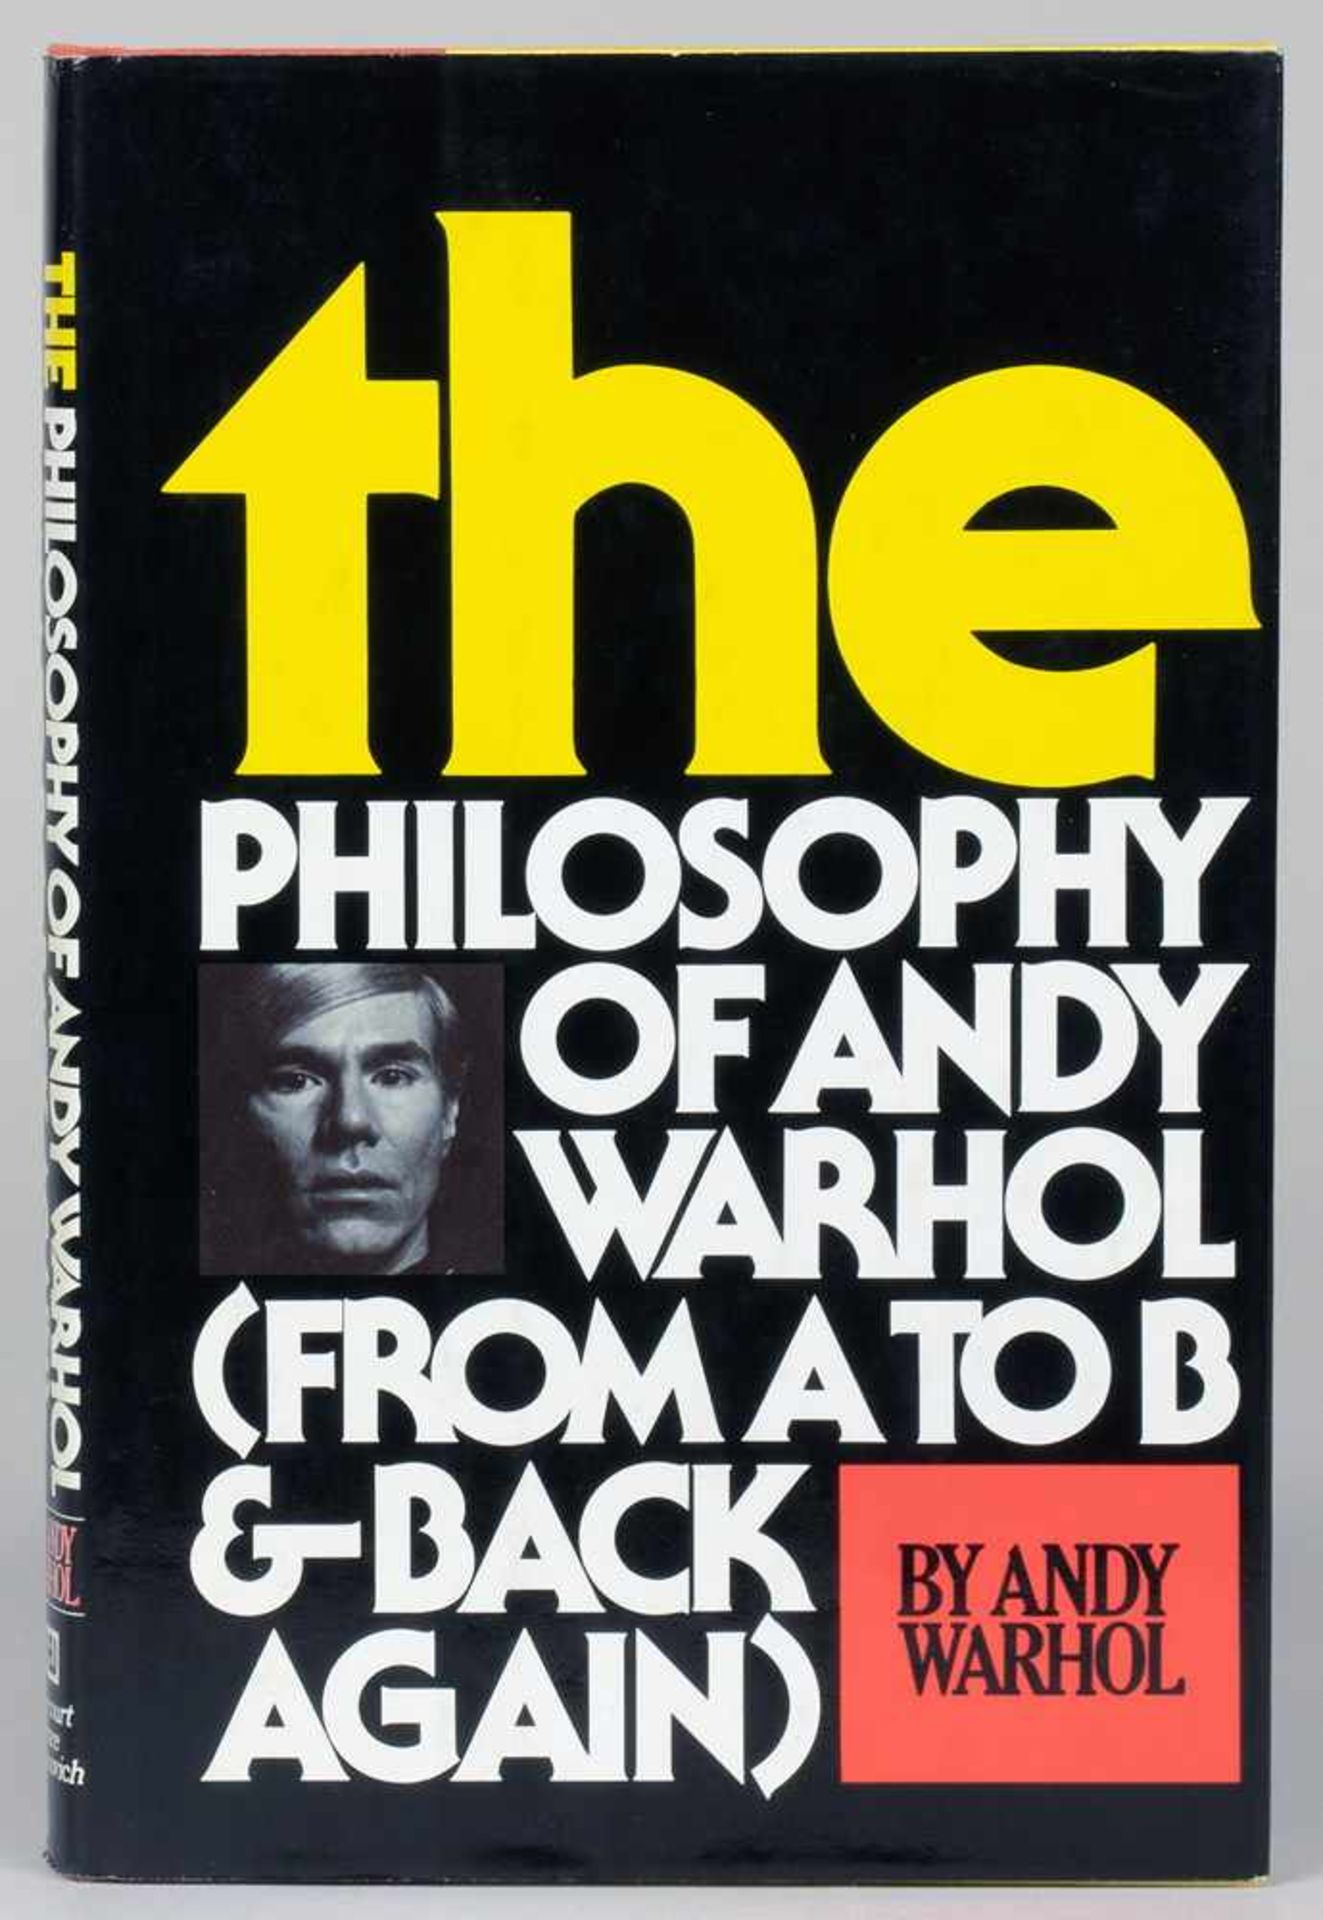 Andy Warhol. The Philosophy of Andy Warhol (from A to B and Back Again). New York und London, - Image 2 of 2